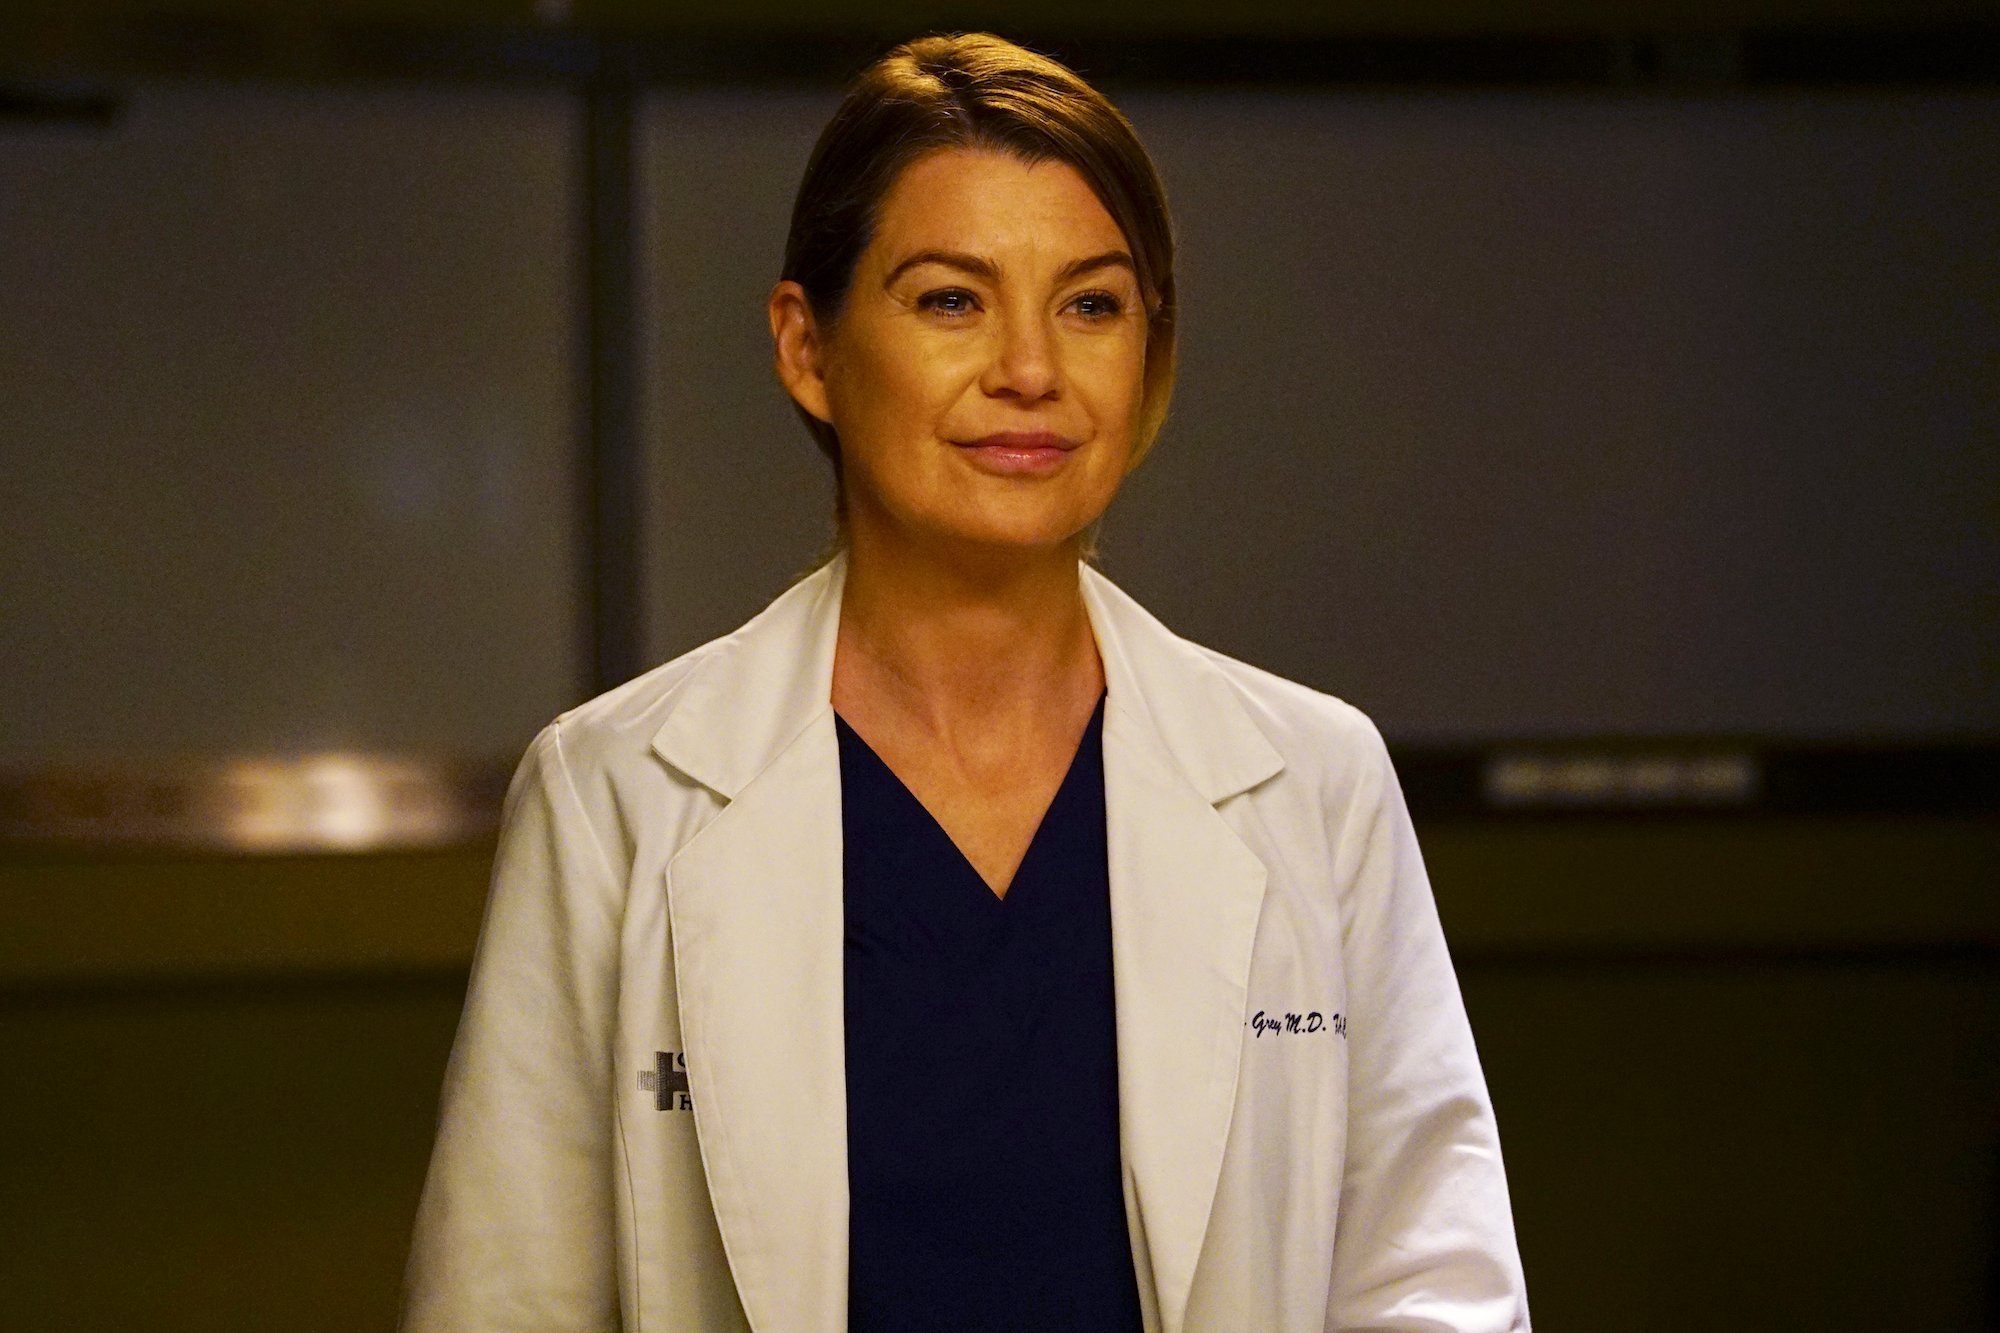 Ellen Pompeo as Meredith Grey smiling in front of a blurred background